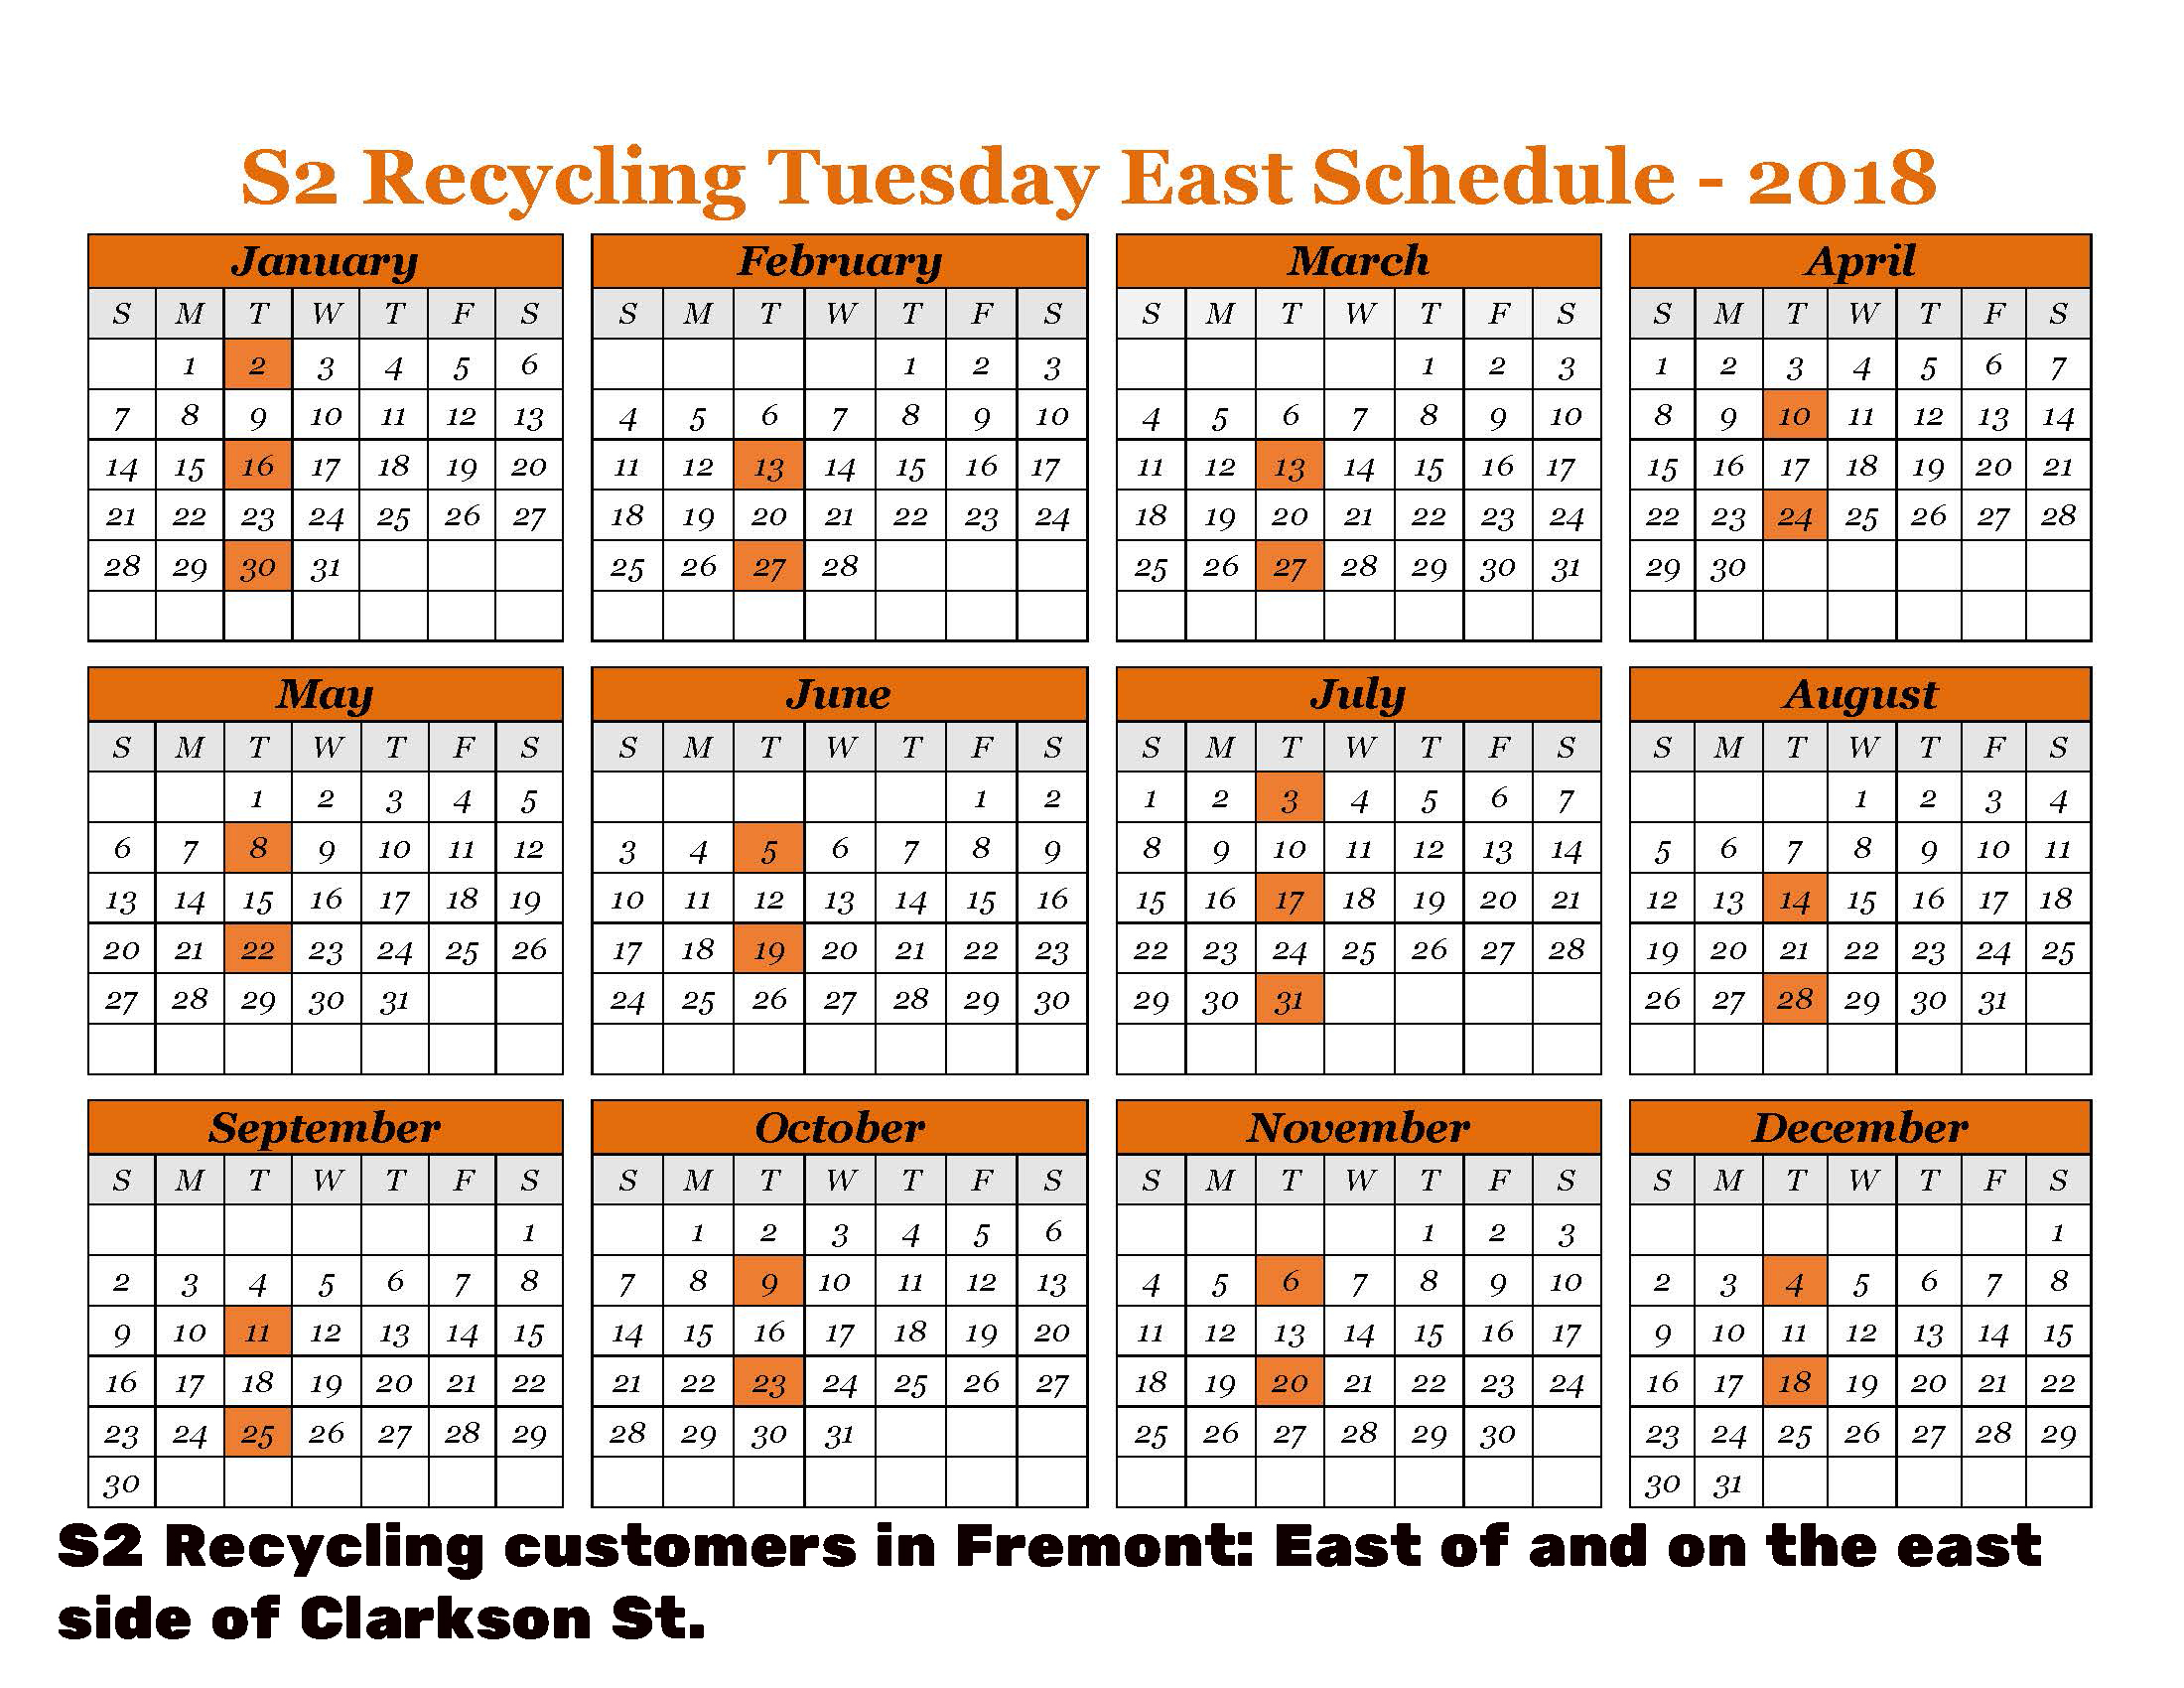 2018 Recycling Tuesday East Schudule